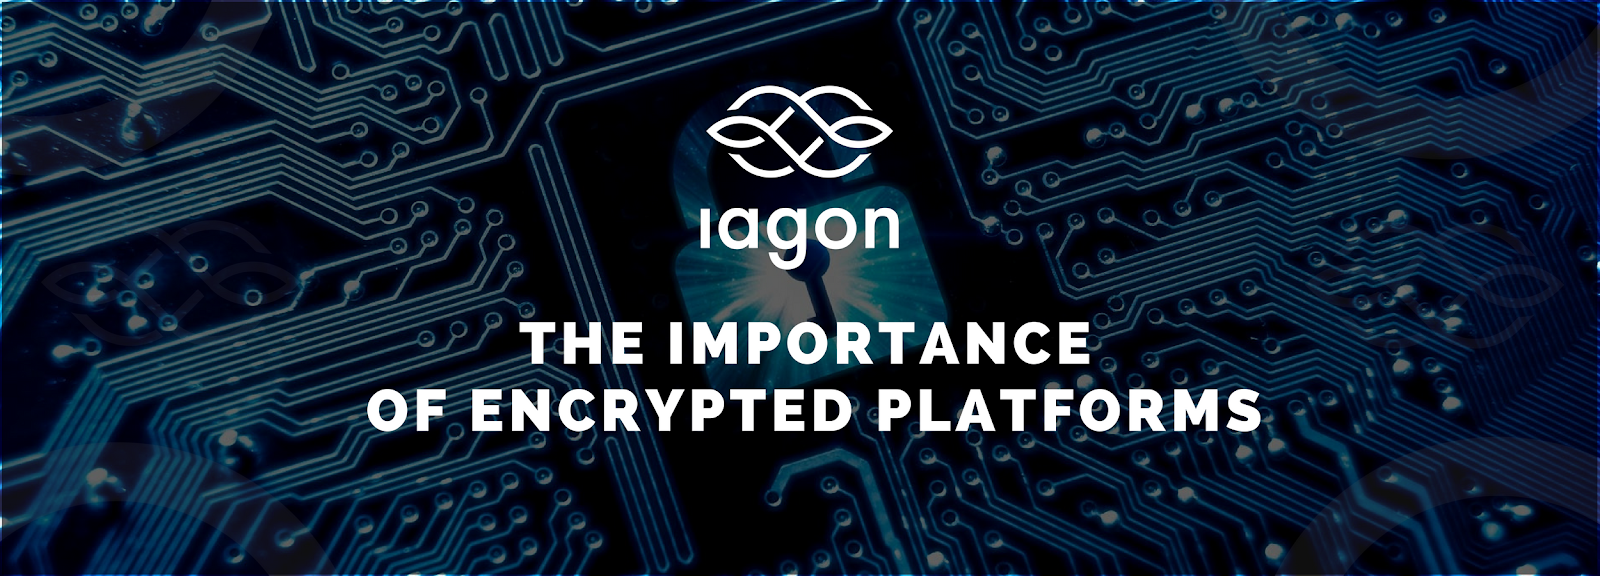 The Importance of Encrypted Platforms